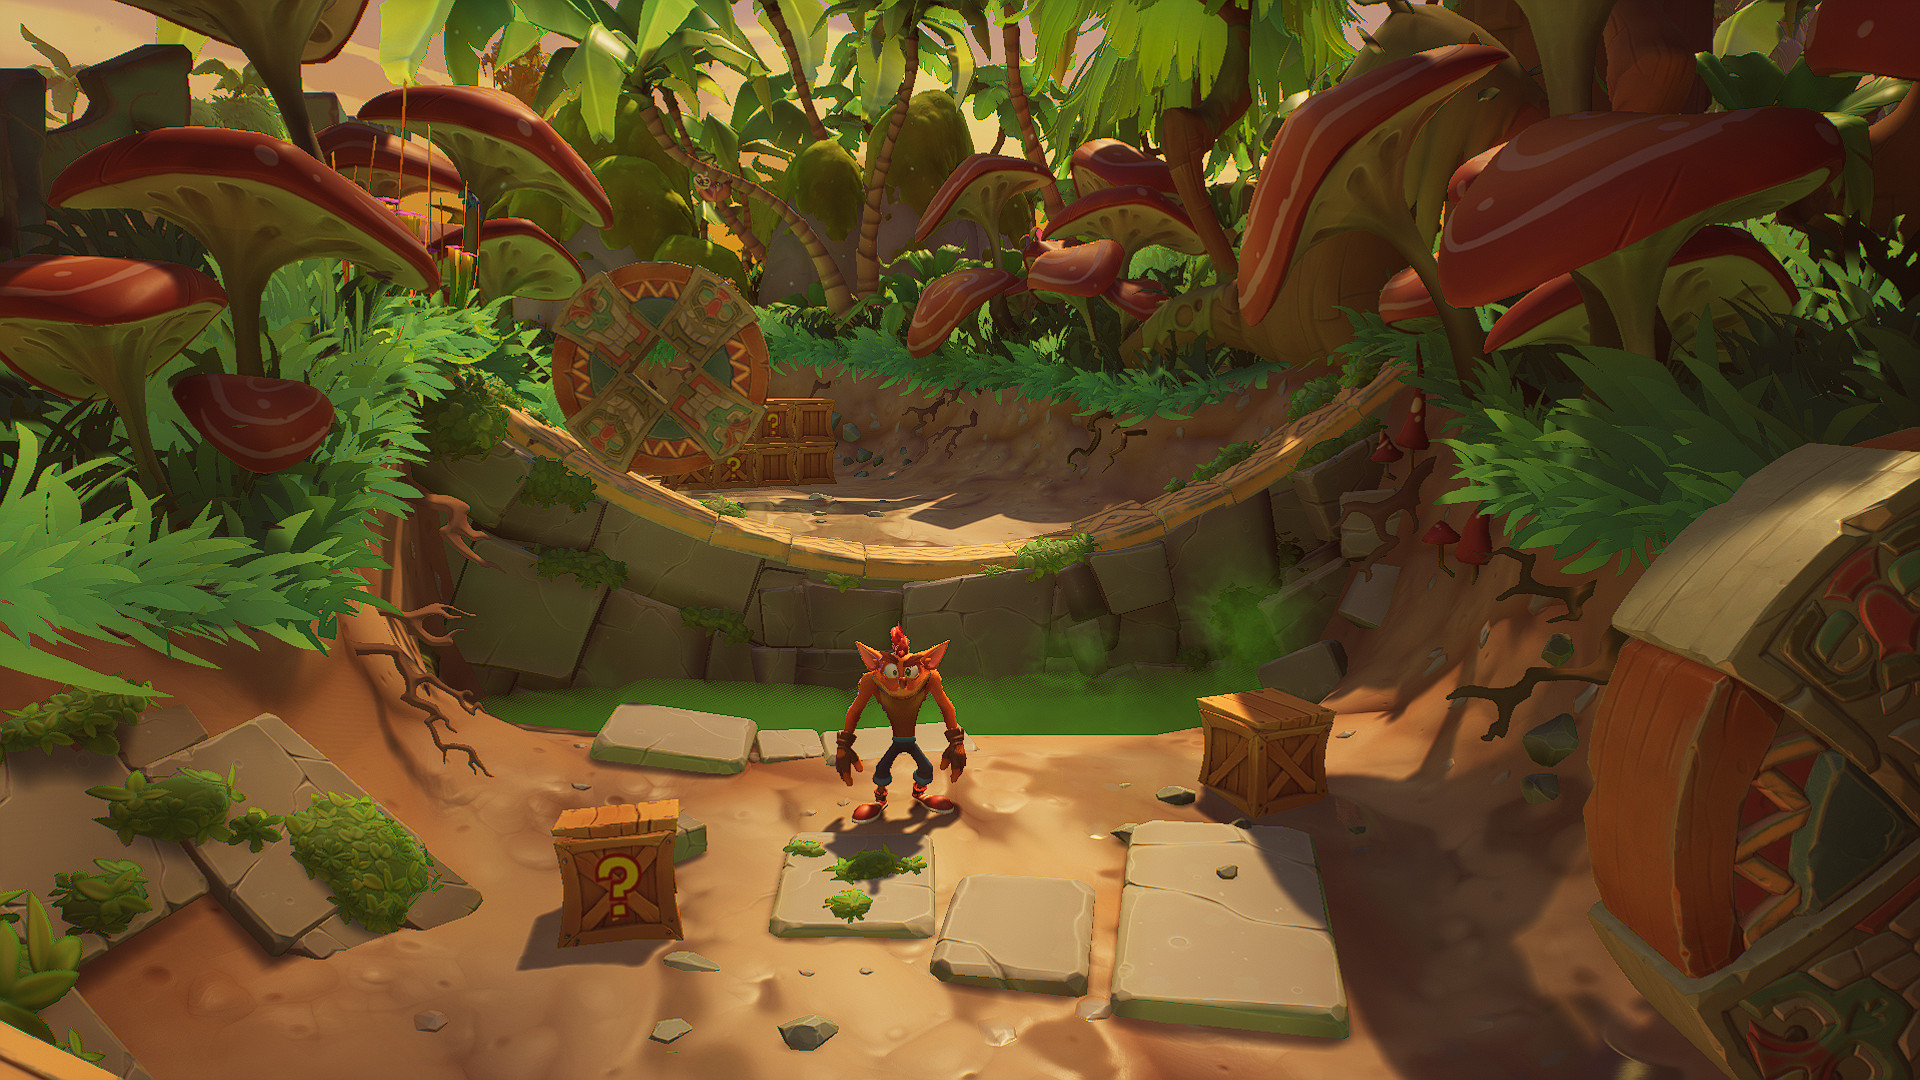 Crash Bandicoot 4 technical review -- Sometimes true to its name